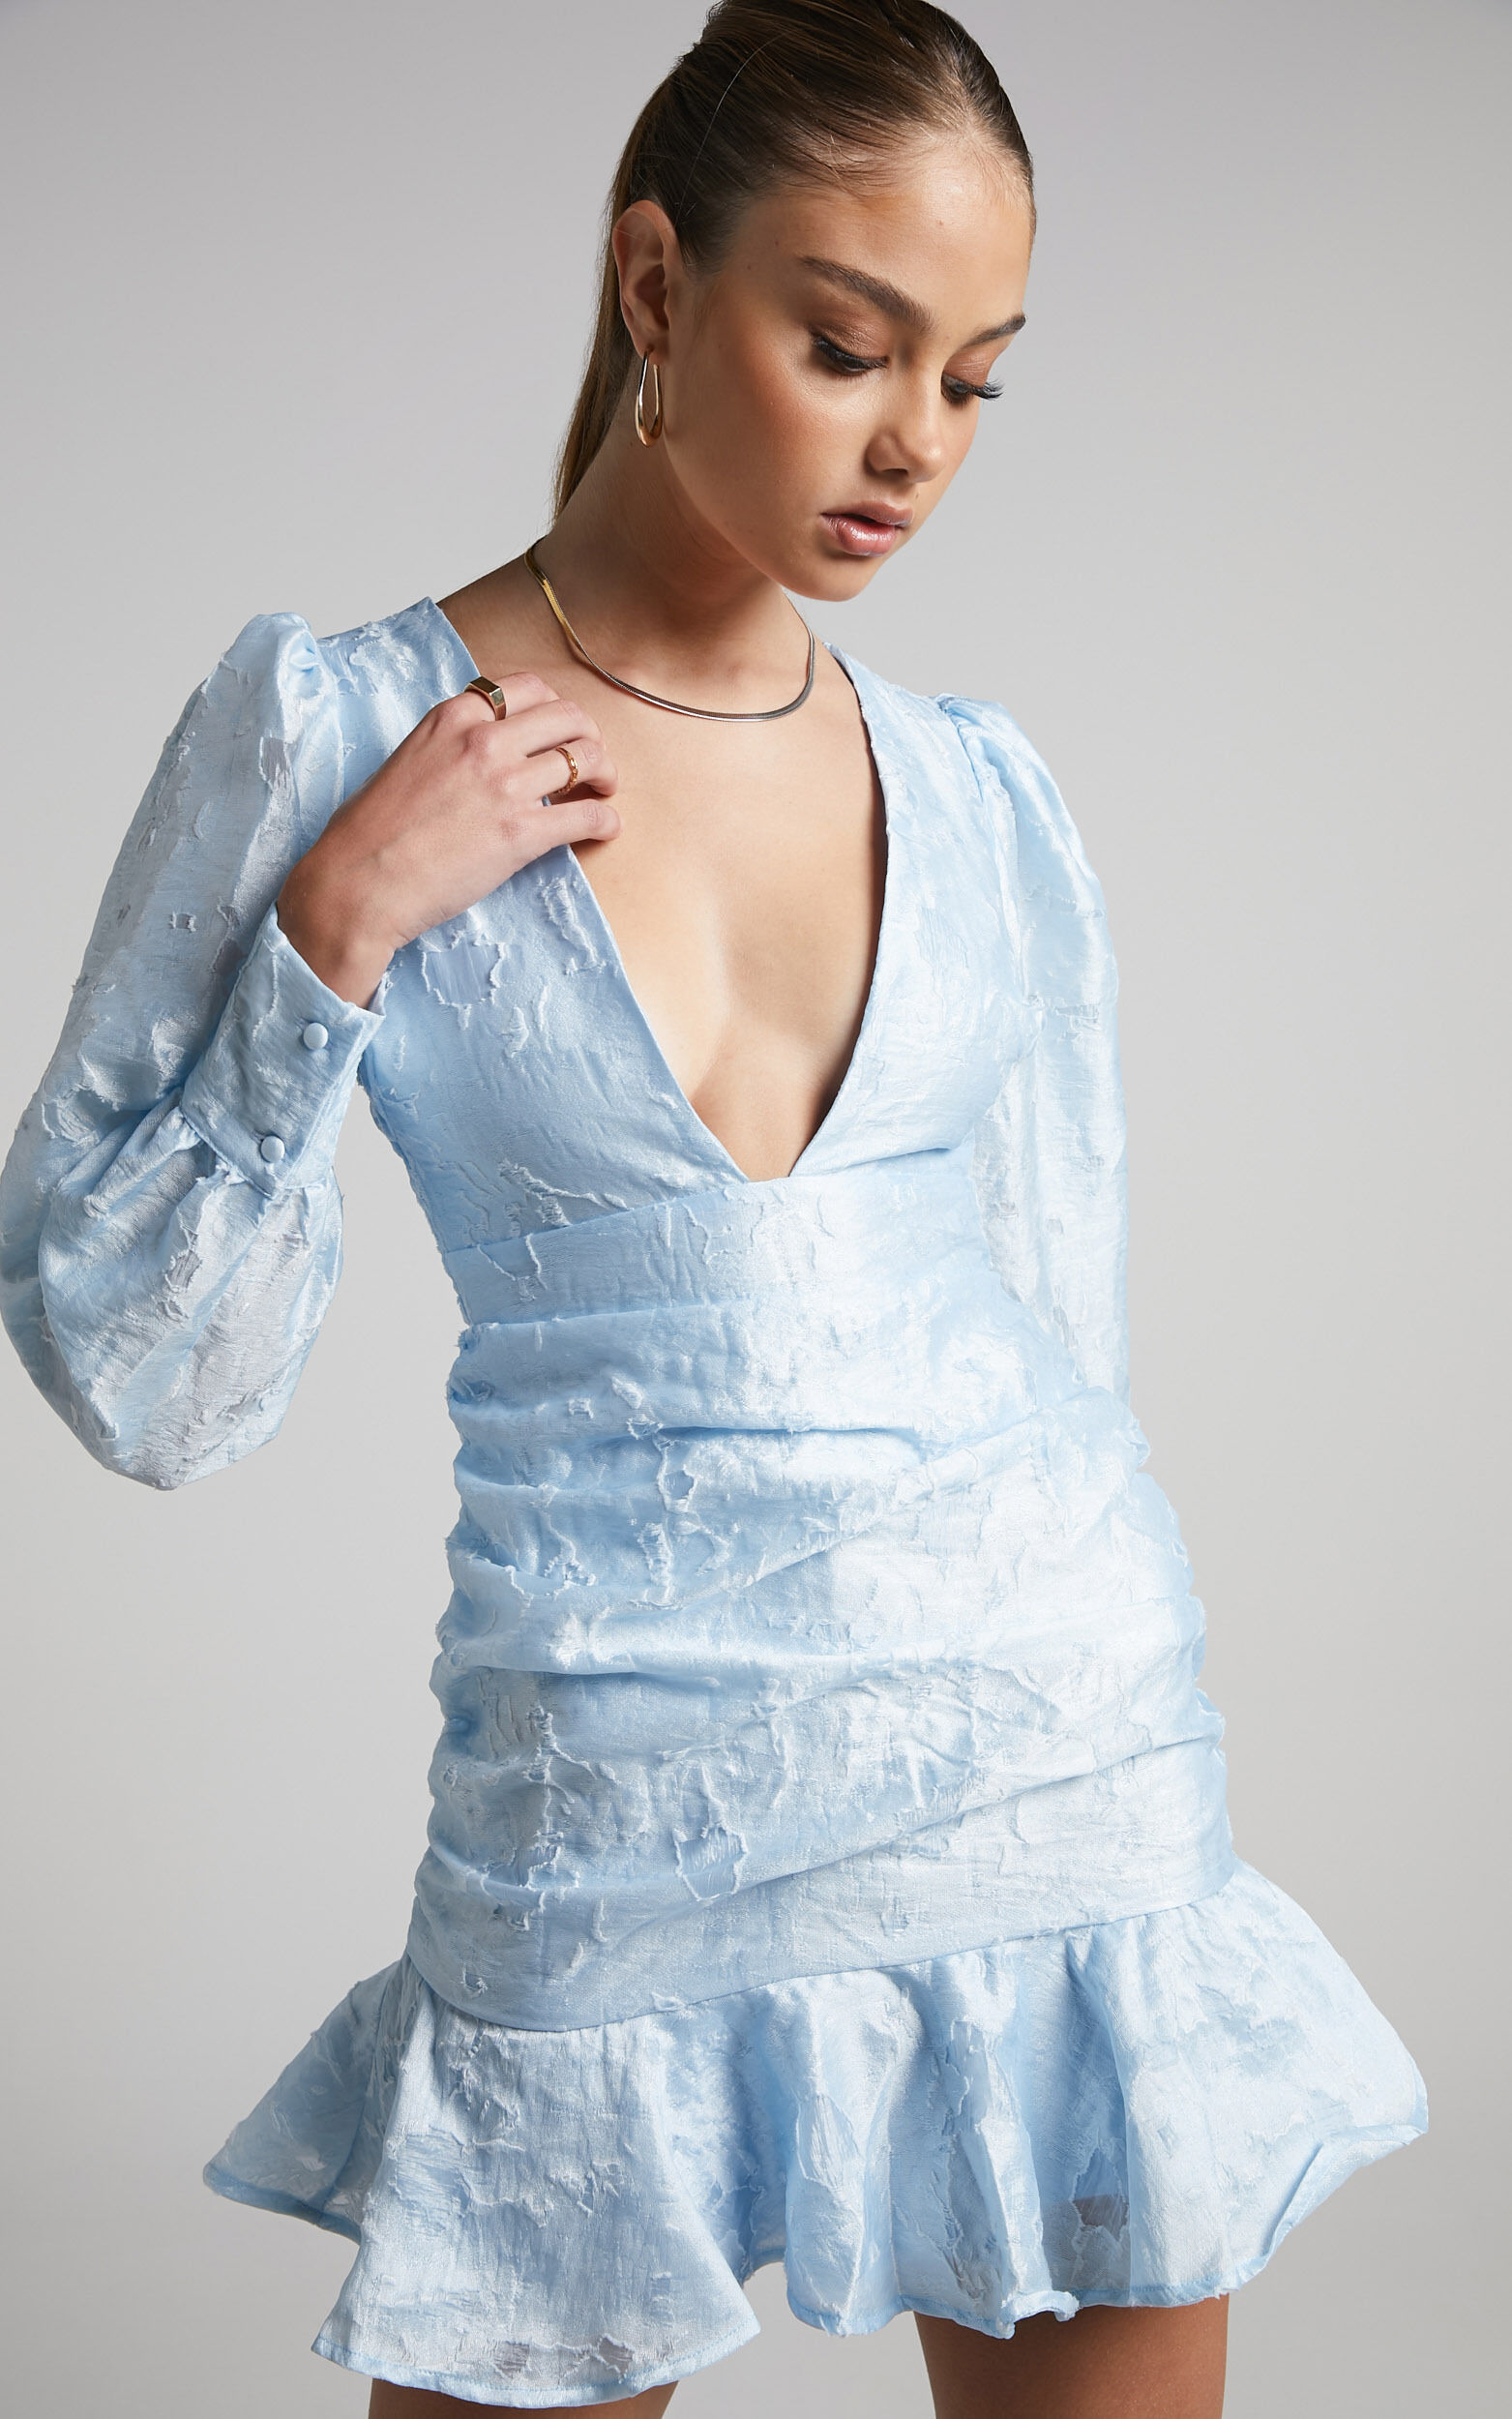 Baxia Textured Balloon Sleeve Mini Dress in Light Blue - 04, BLU1, super-hi-res image number null